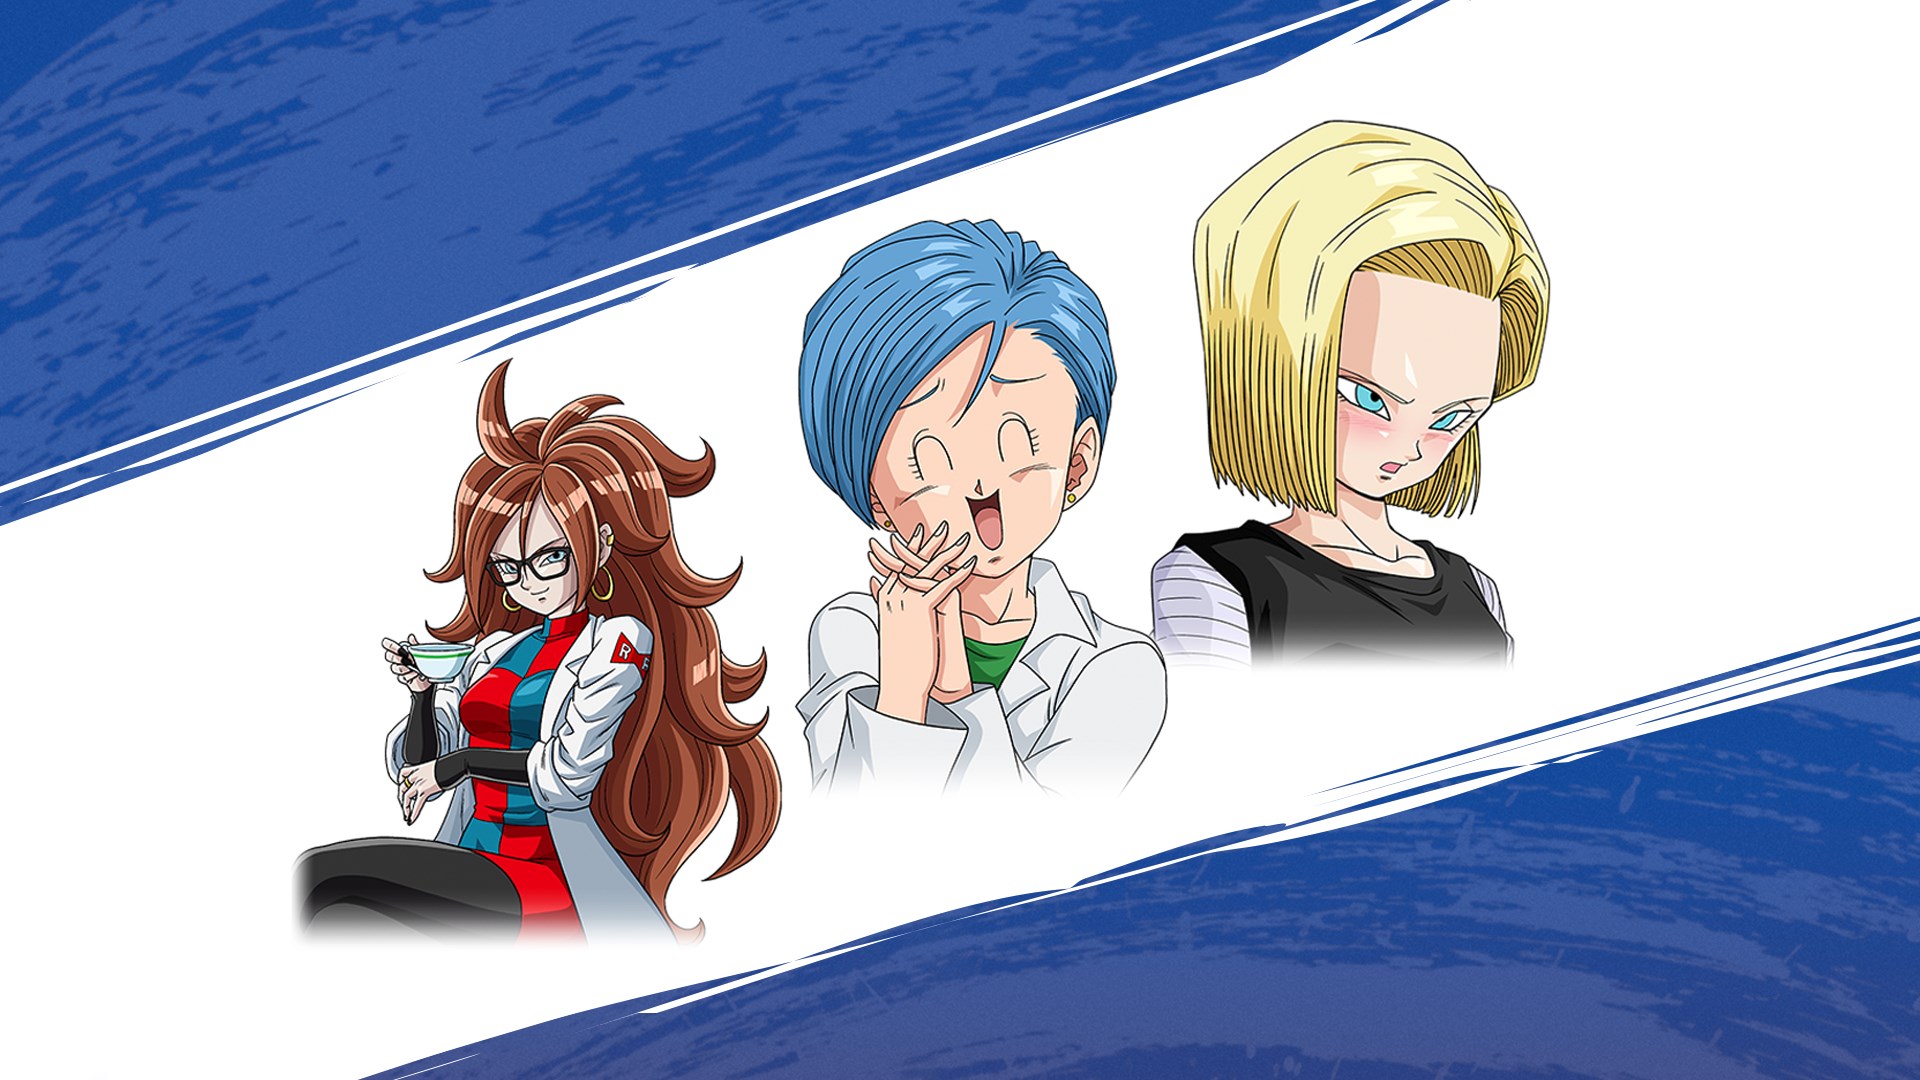 DRAGON BALL FIGHTERZ - Stamps: Girls Pack